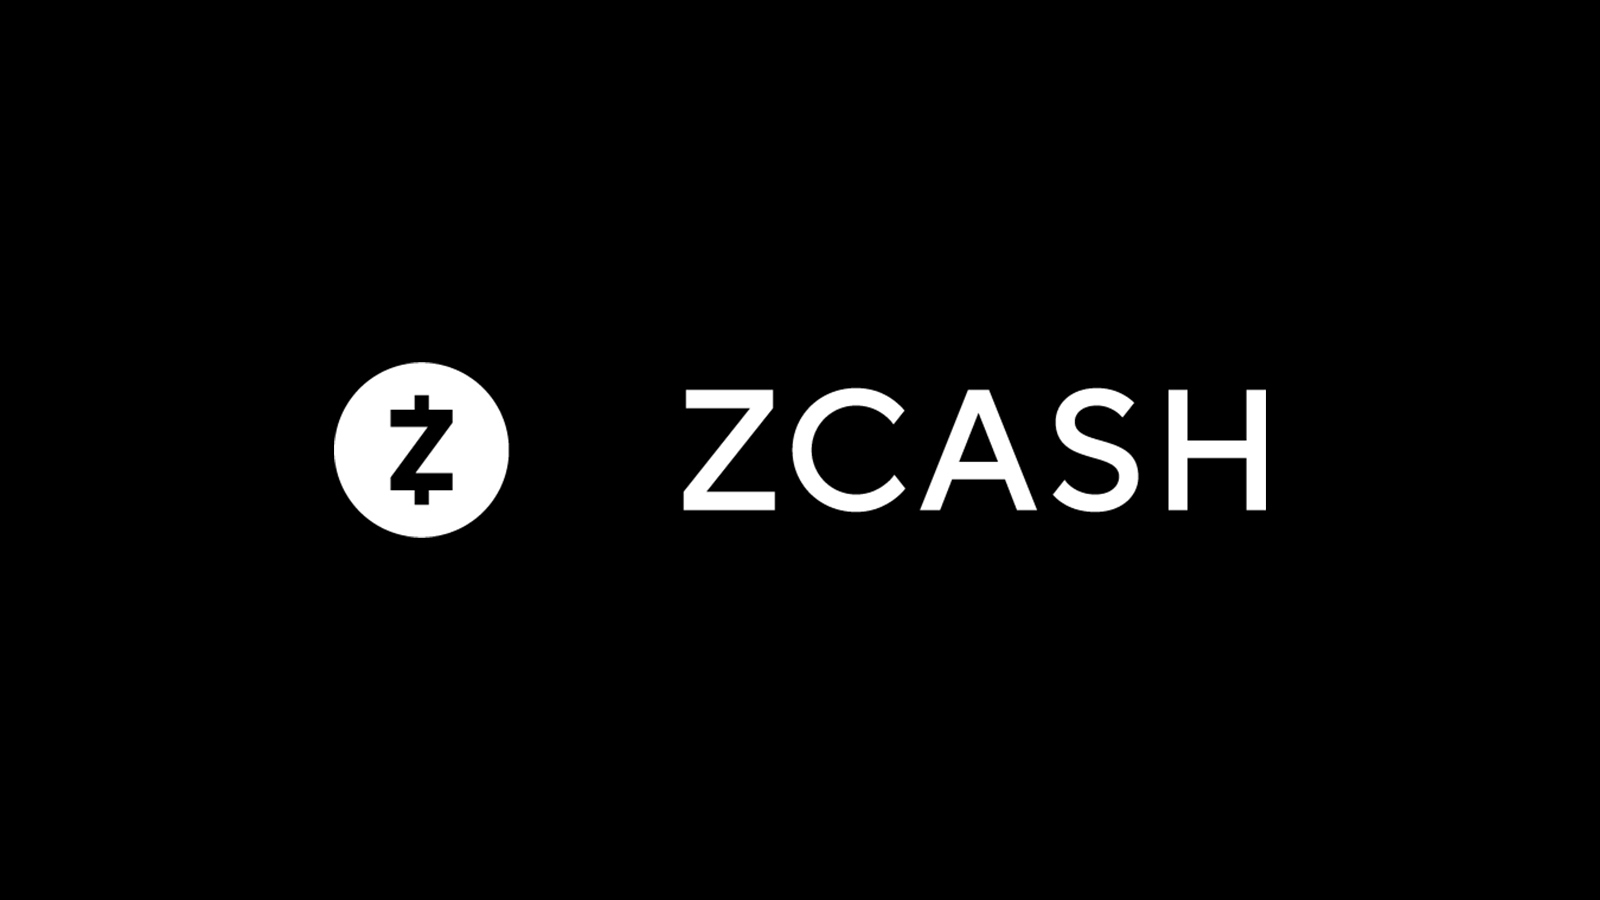 In 2016, Zcash became a pioneer in blockchain privacy with the introduction of zk-SNARKs, a special type of zero-knowledge proof that conceals sensitive transactional data prior to it being sent. Unfortunately, because of its age and other factors, the Zcash platform lacks smart contract capabilities, which makes it unsustainable moving forward. (Image Credit: Google image search via Zcash website)